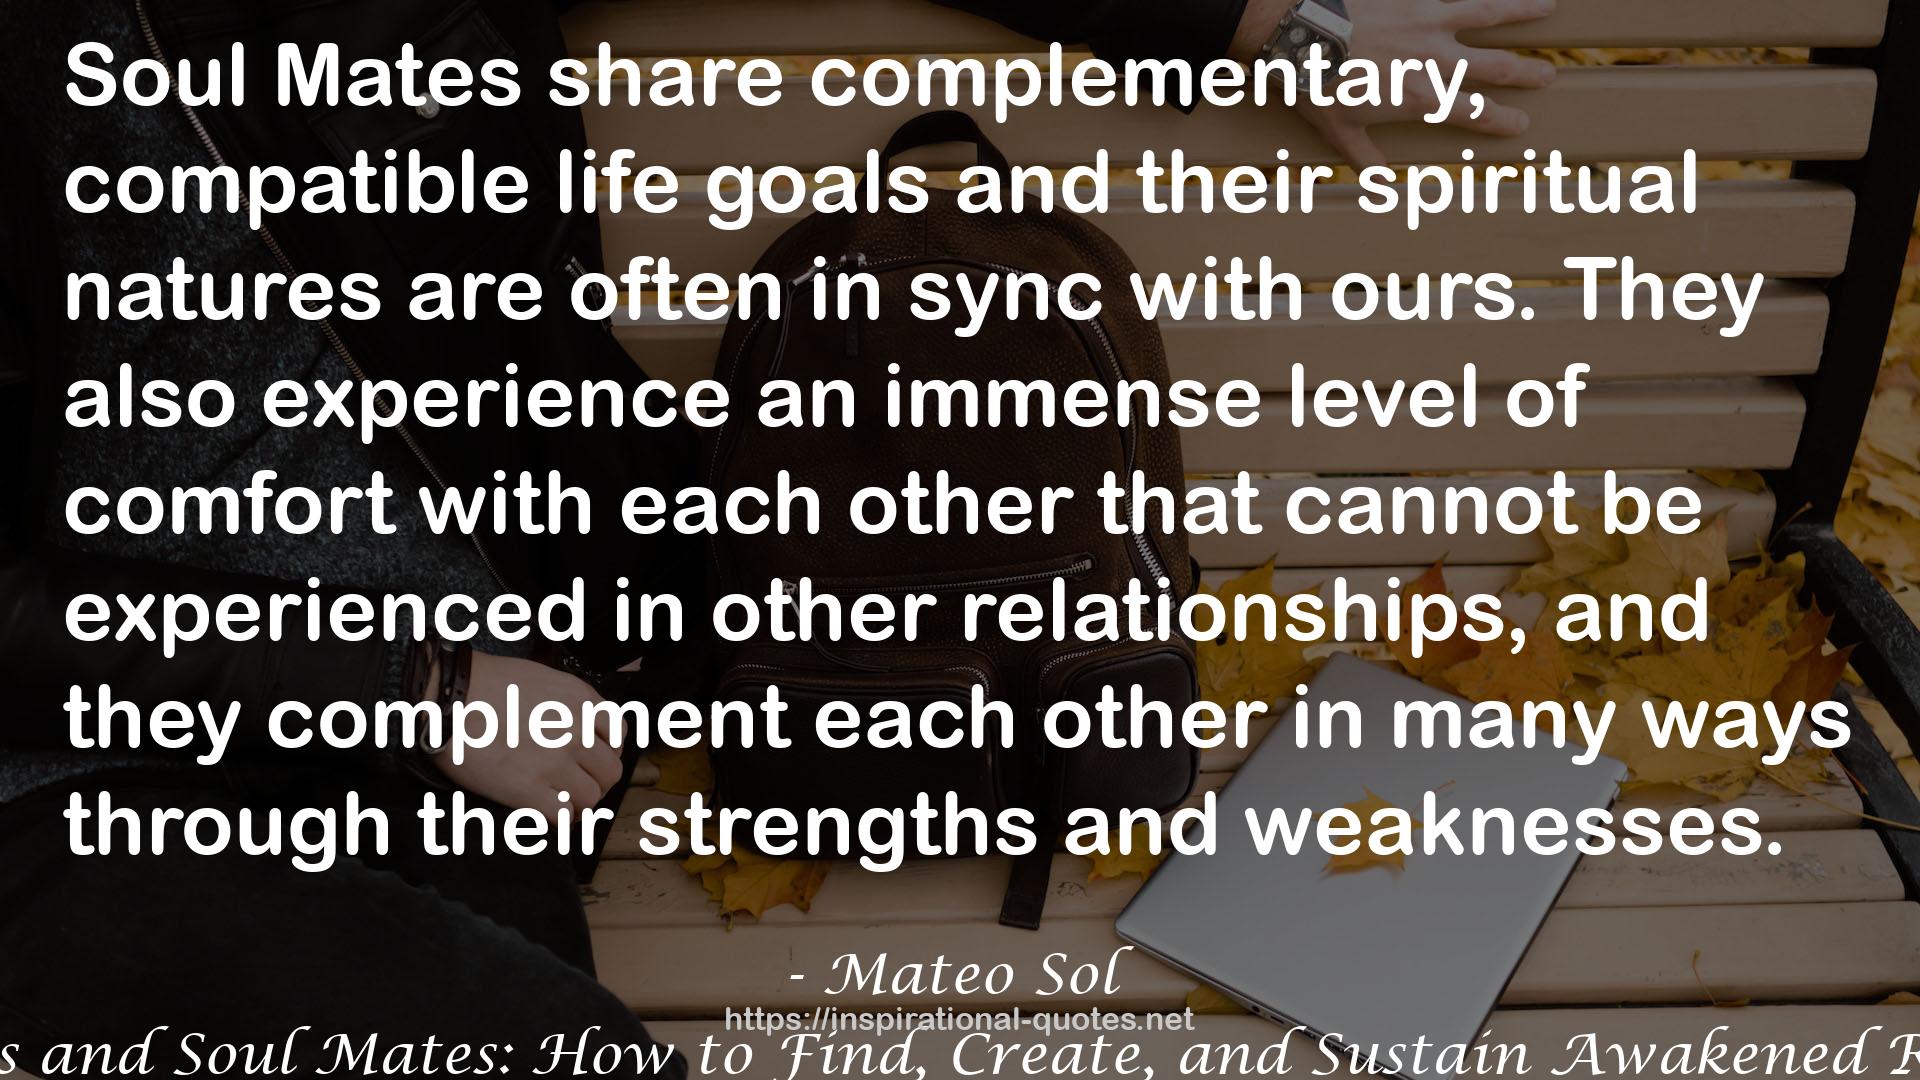 Twin Flames and Soul Mates: How to Find, Create, and Sustain Awakened Relationships QUOTES